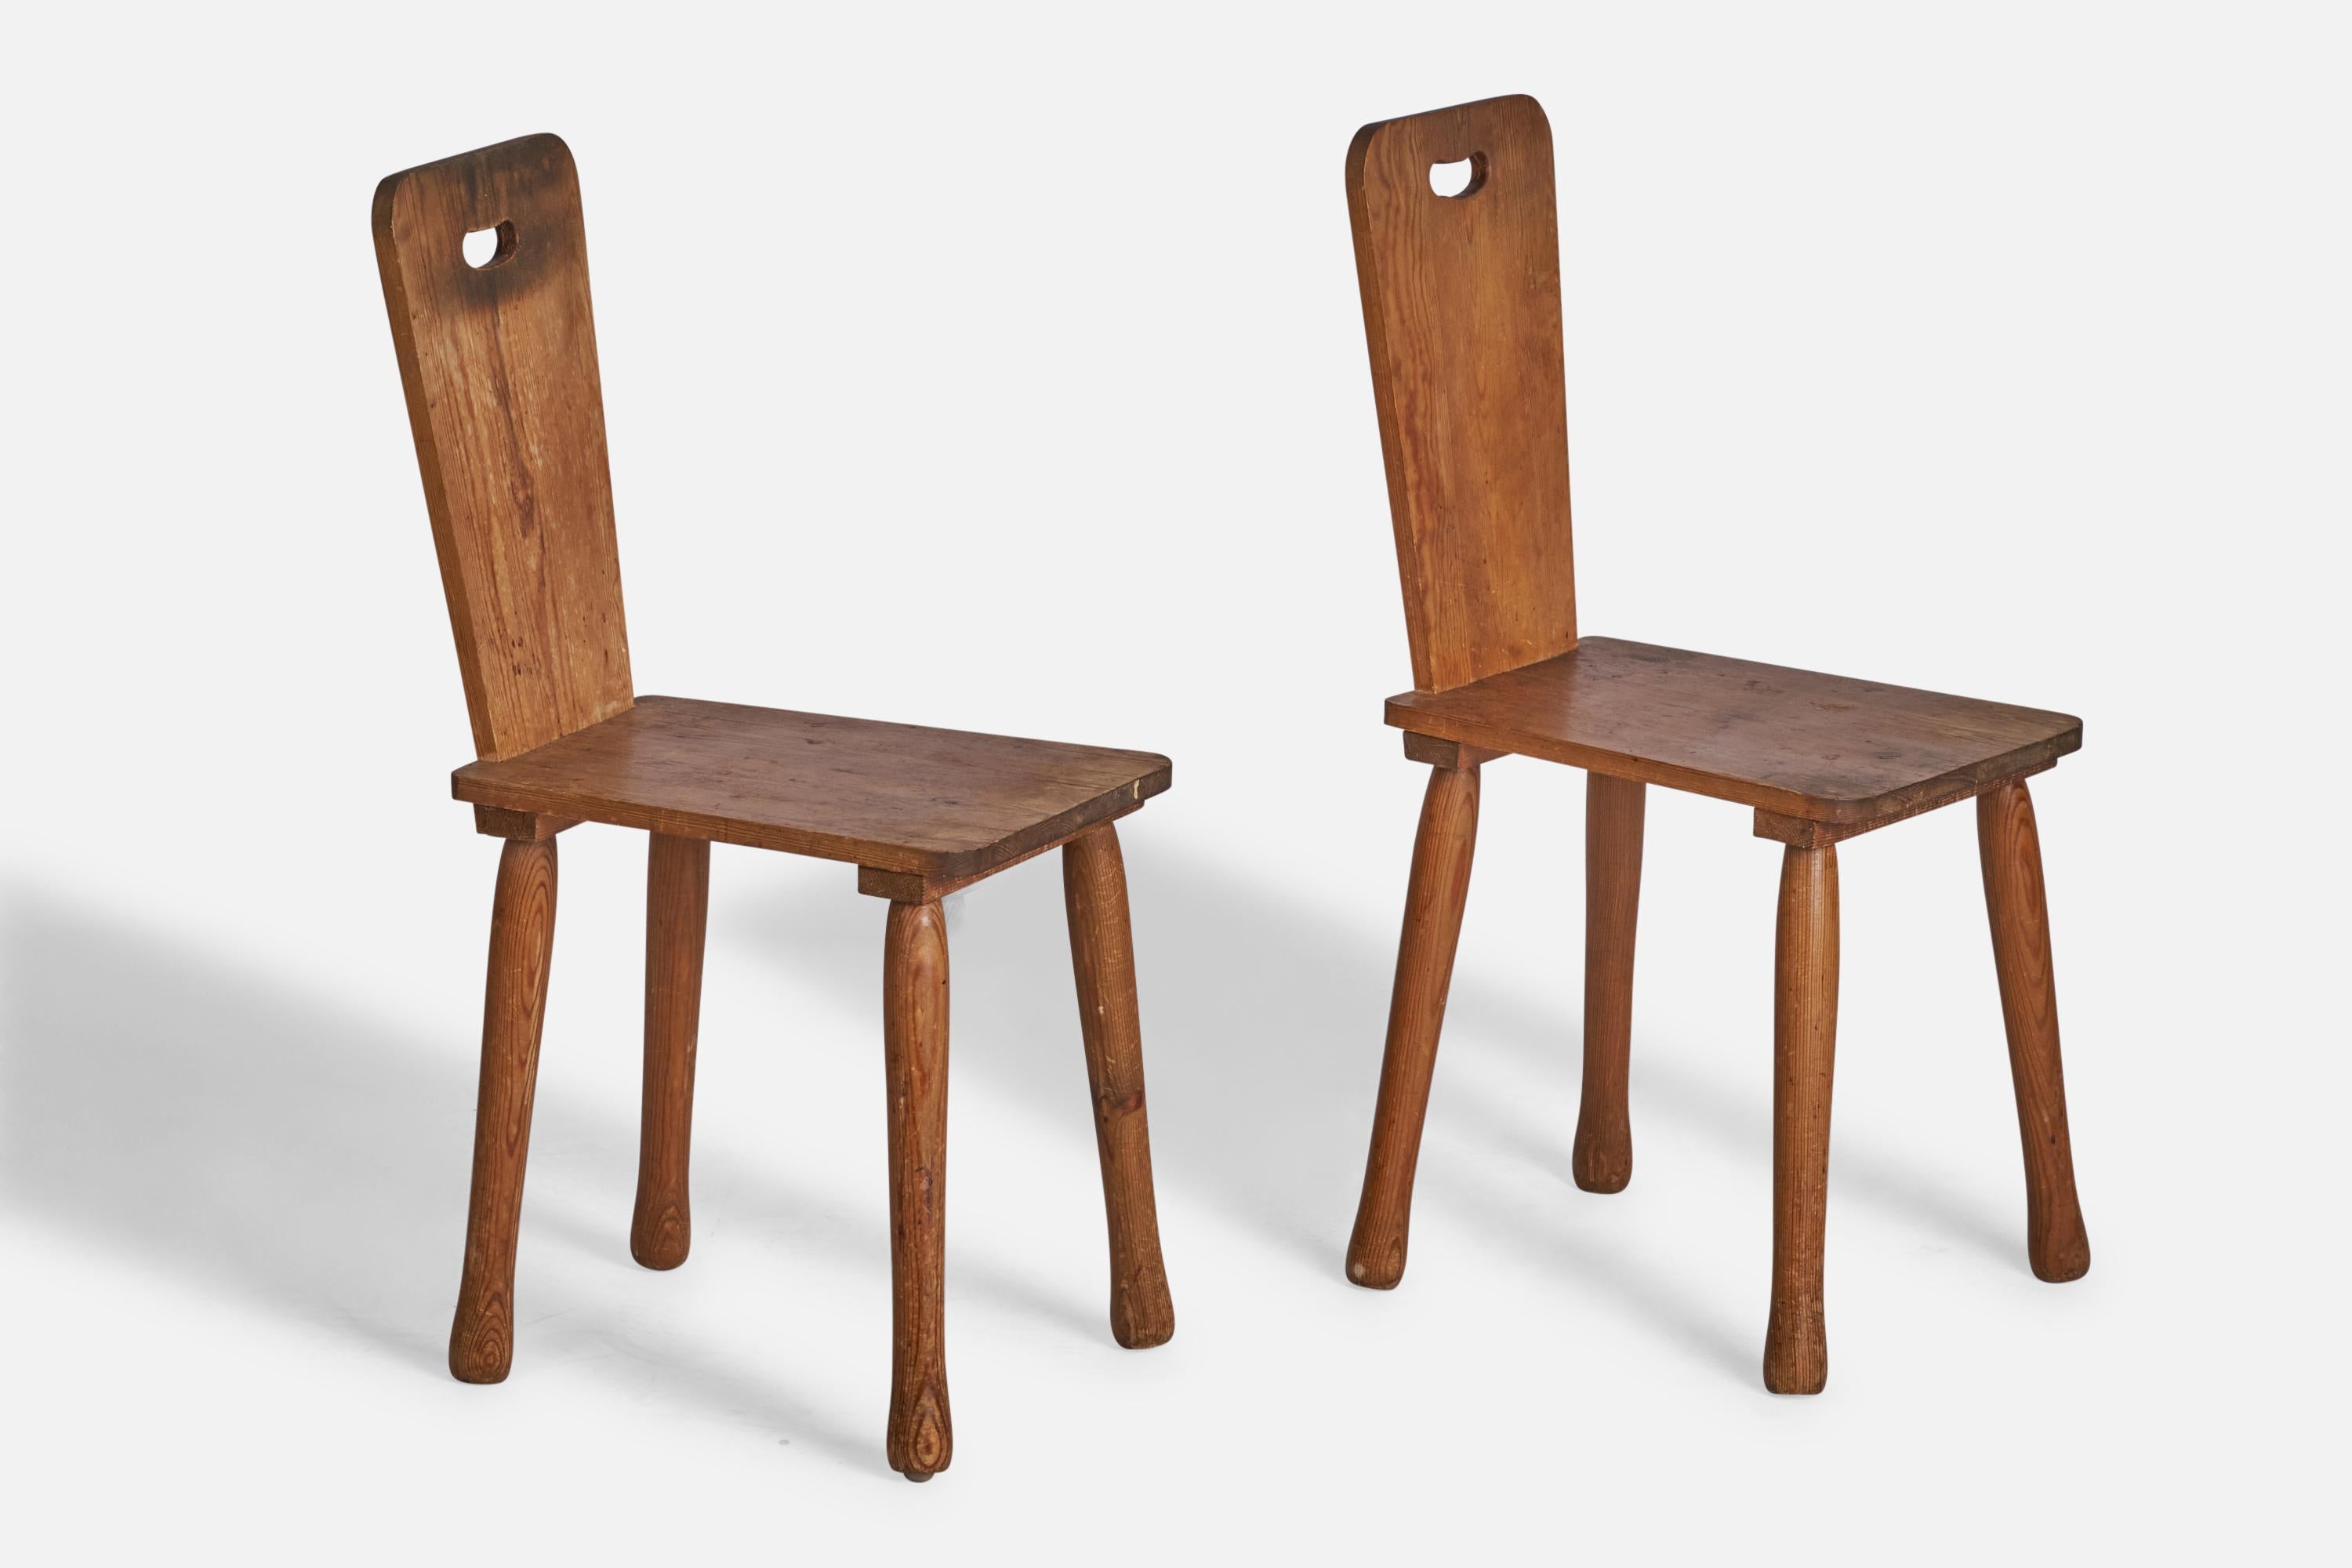 A pair of pine side chairs designed and produced in Sweden, 1940s.

Seat height: 18”